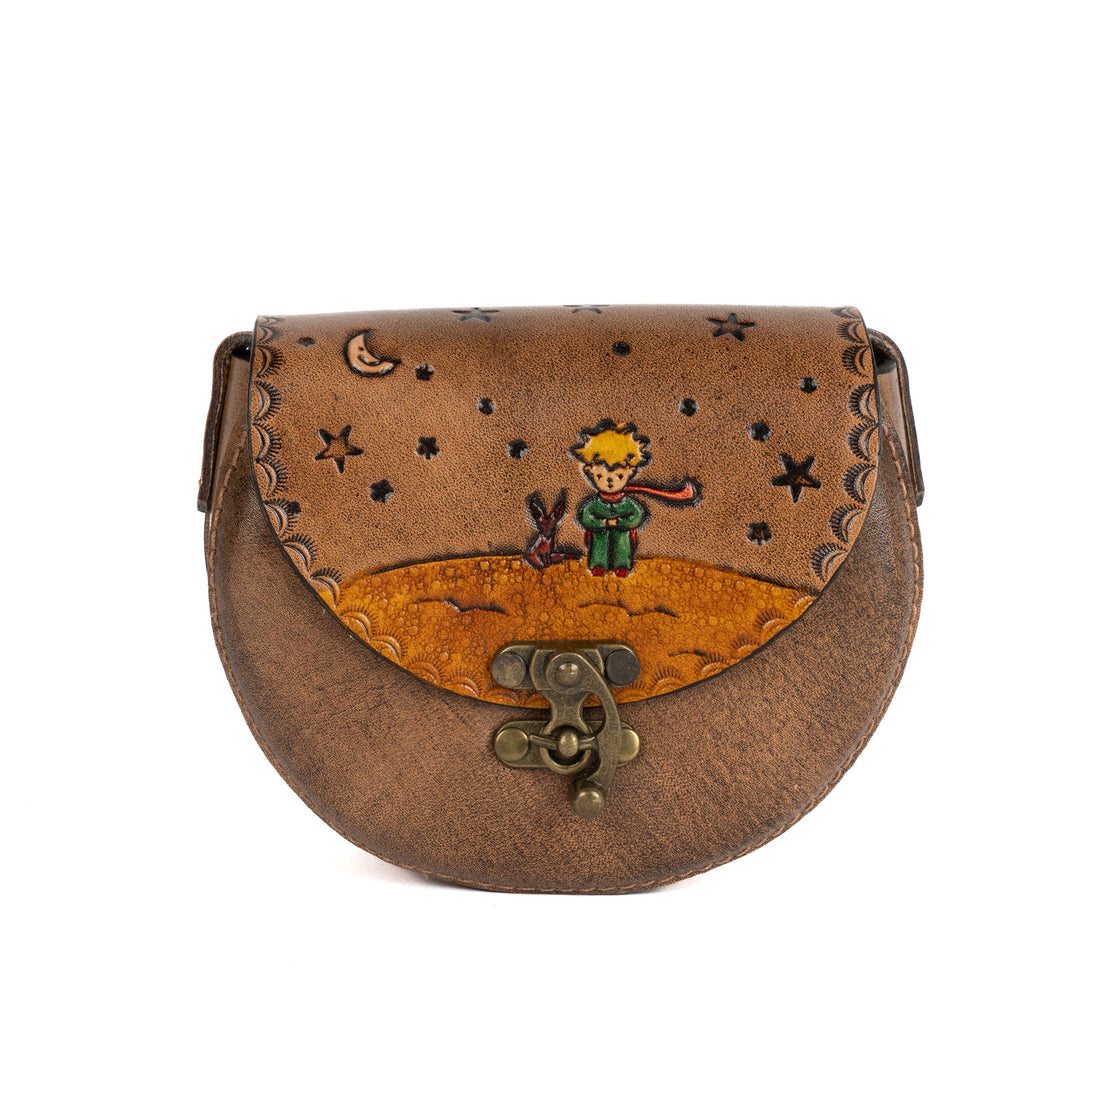 Little Prince Tan Leather Carved & Crafted Hand Bag - Handbags Zengoda Shop online from Artisan Brands